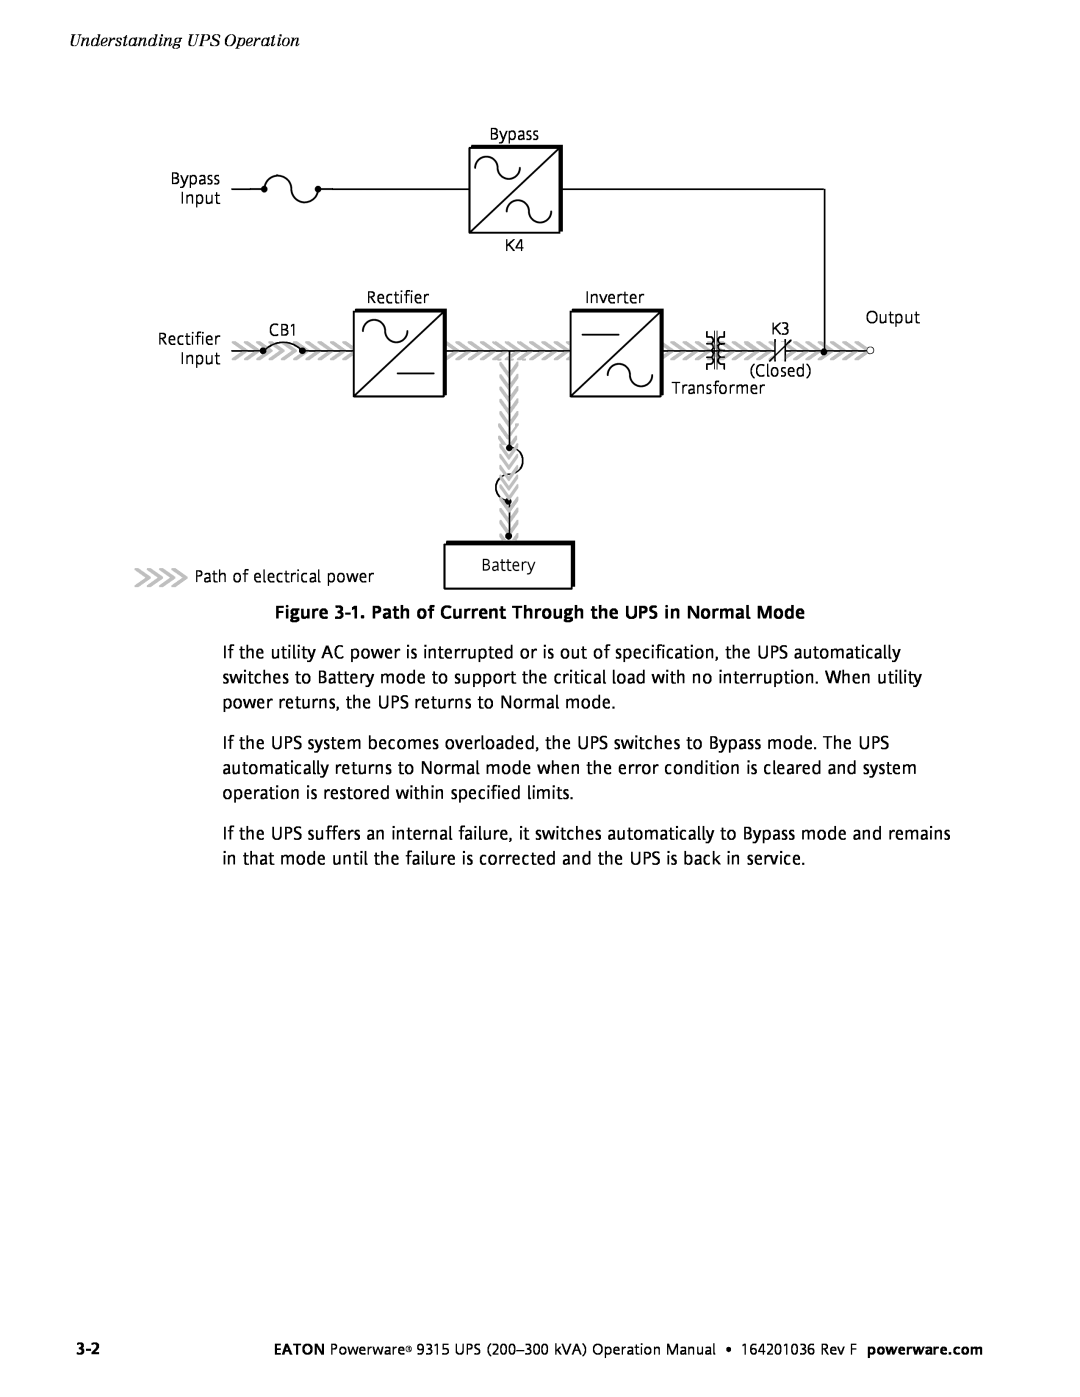 Eaton Electrical Powerware 9315 1. Path of Current Through the UPS in Normal Mode, Understanding UPS Operation 